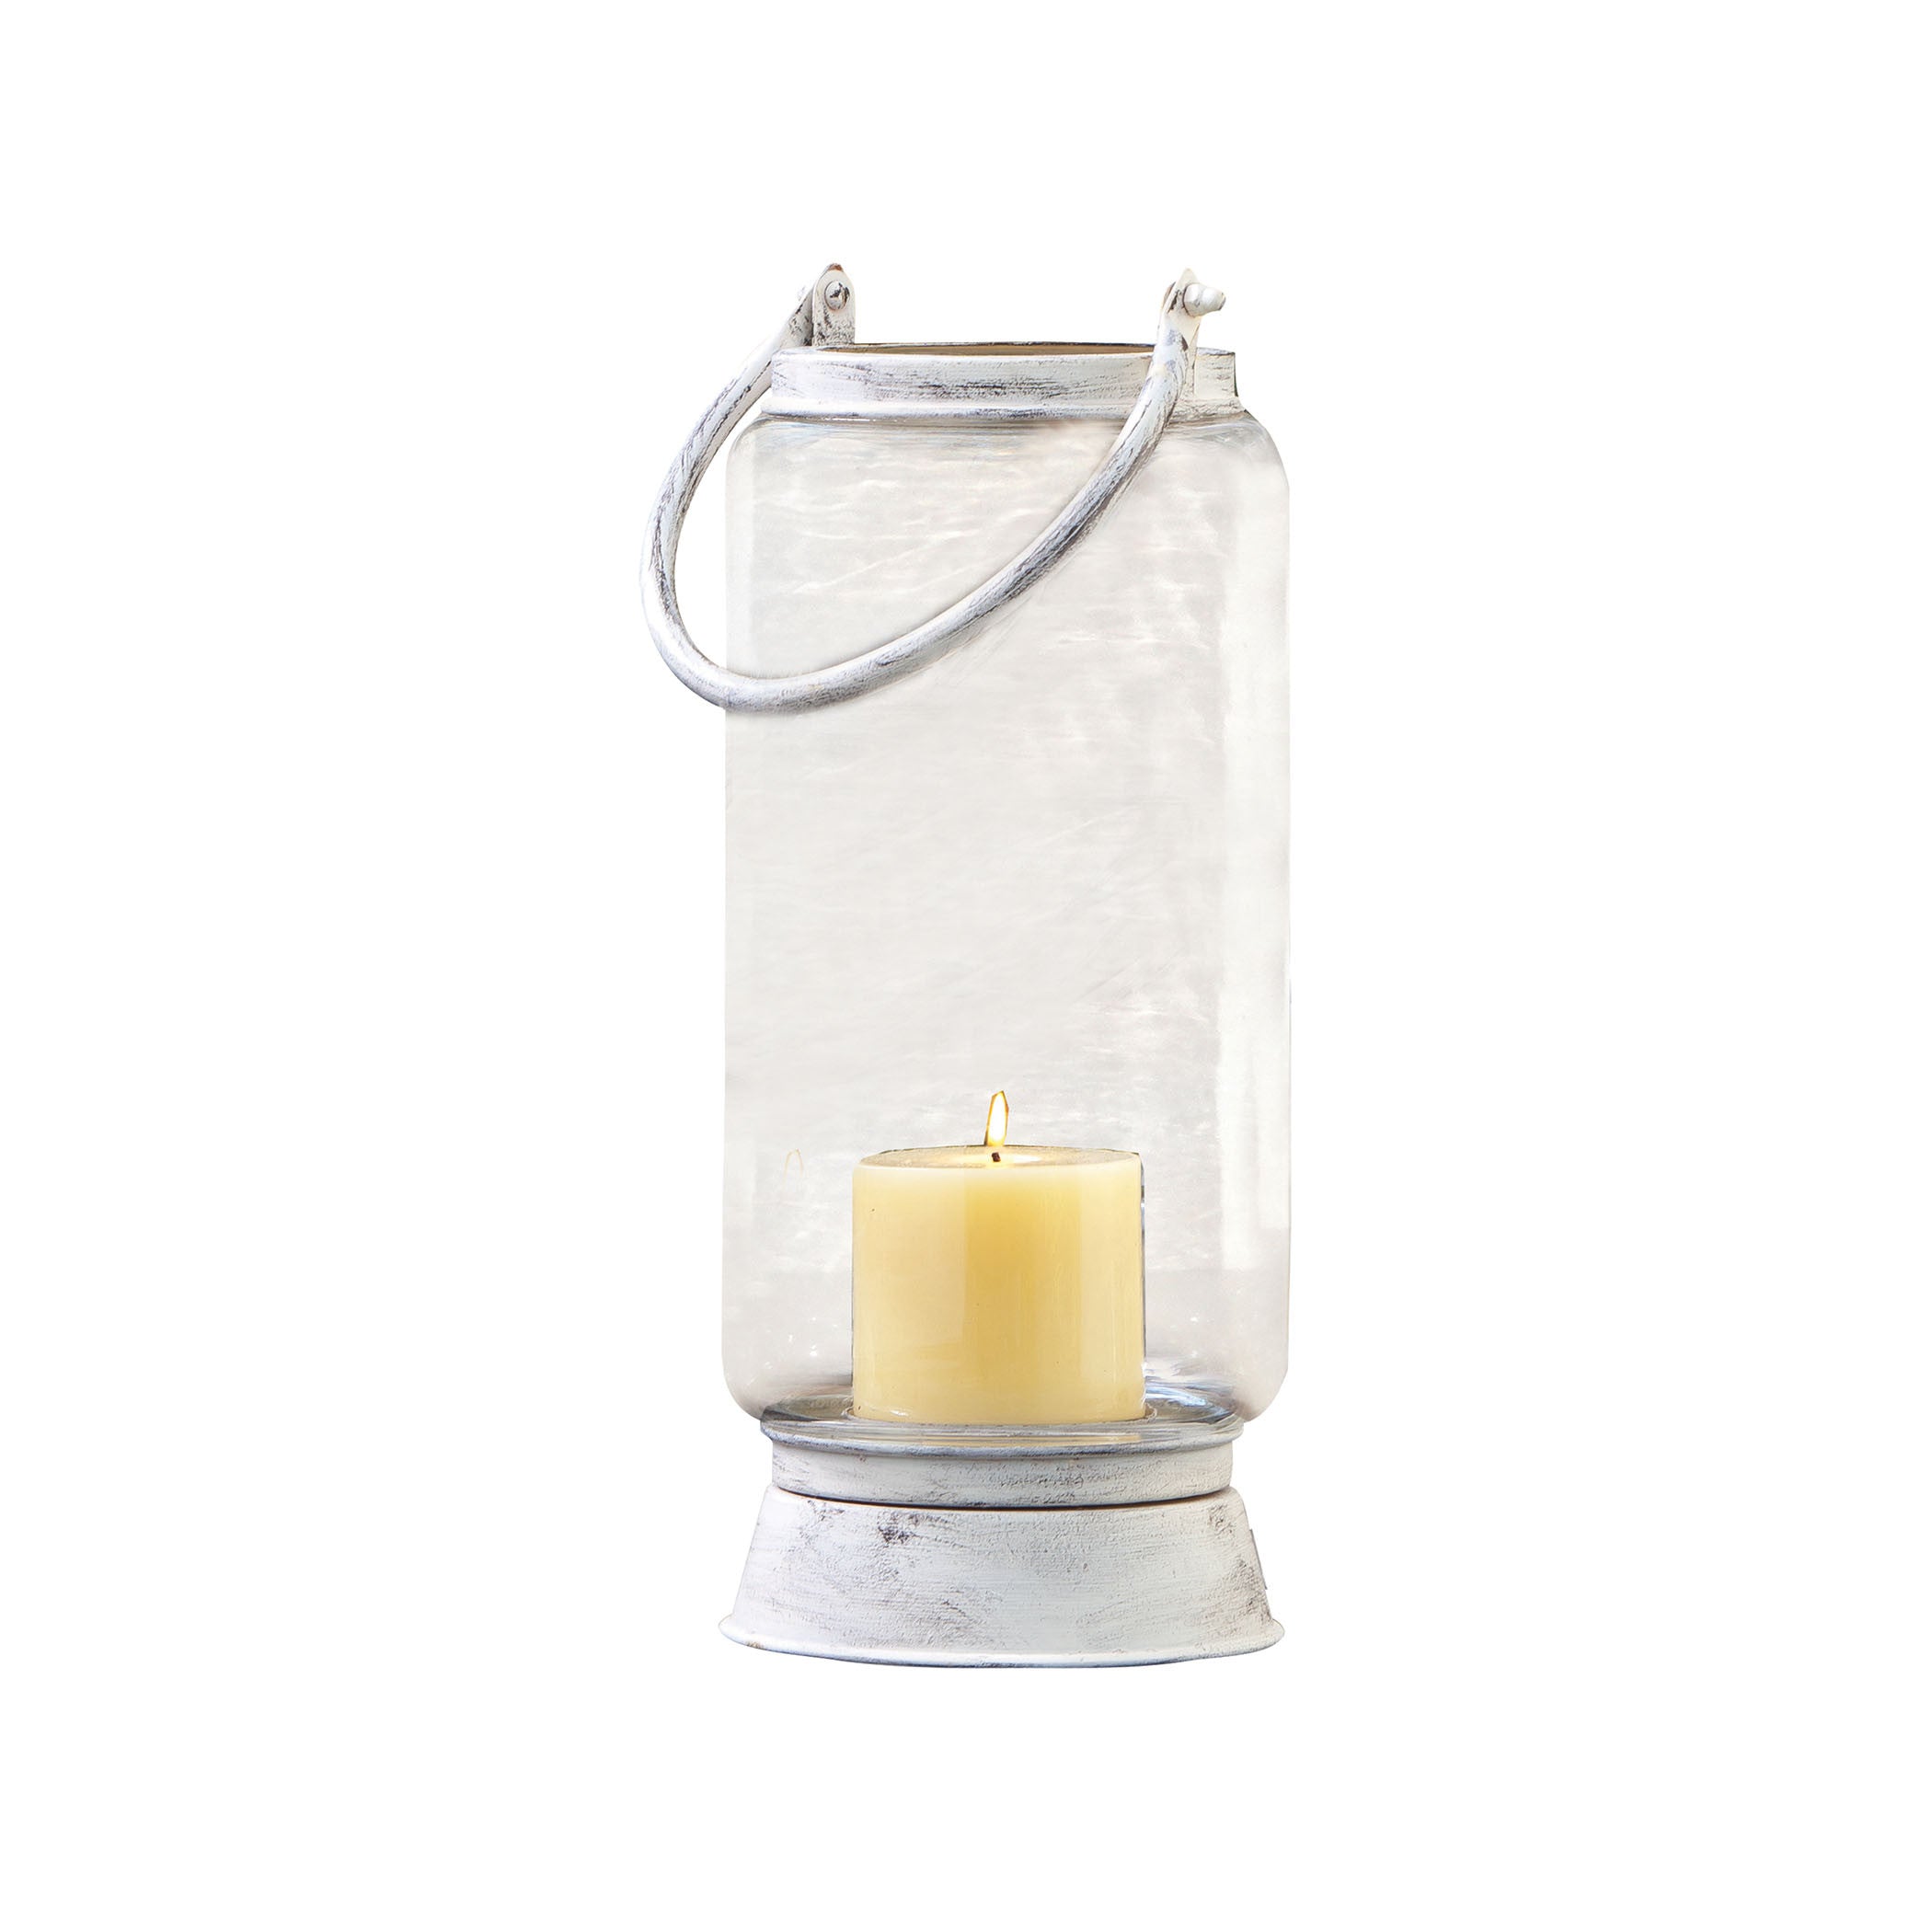 Pomeroy Pom-401350 Taos Collection Antique White,clear Finish Lantern